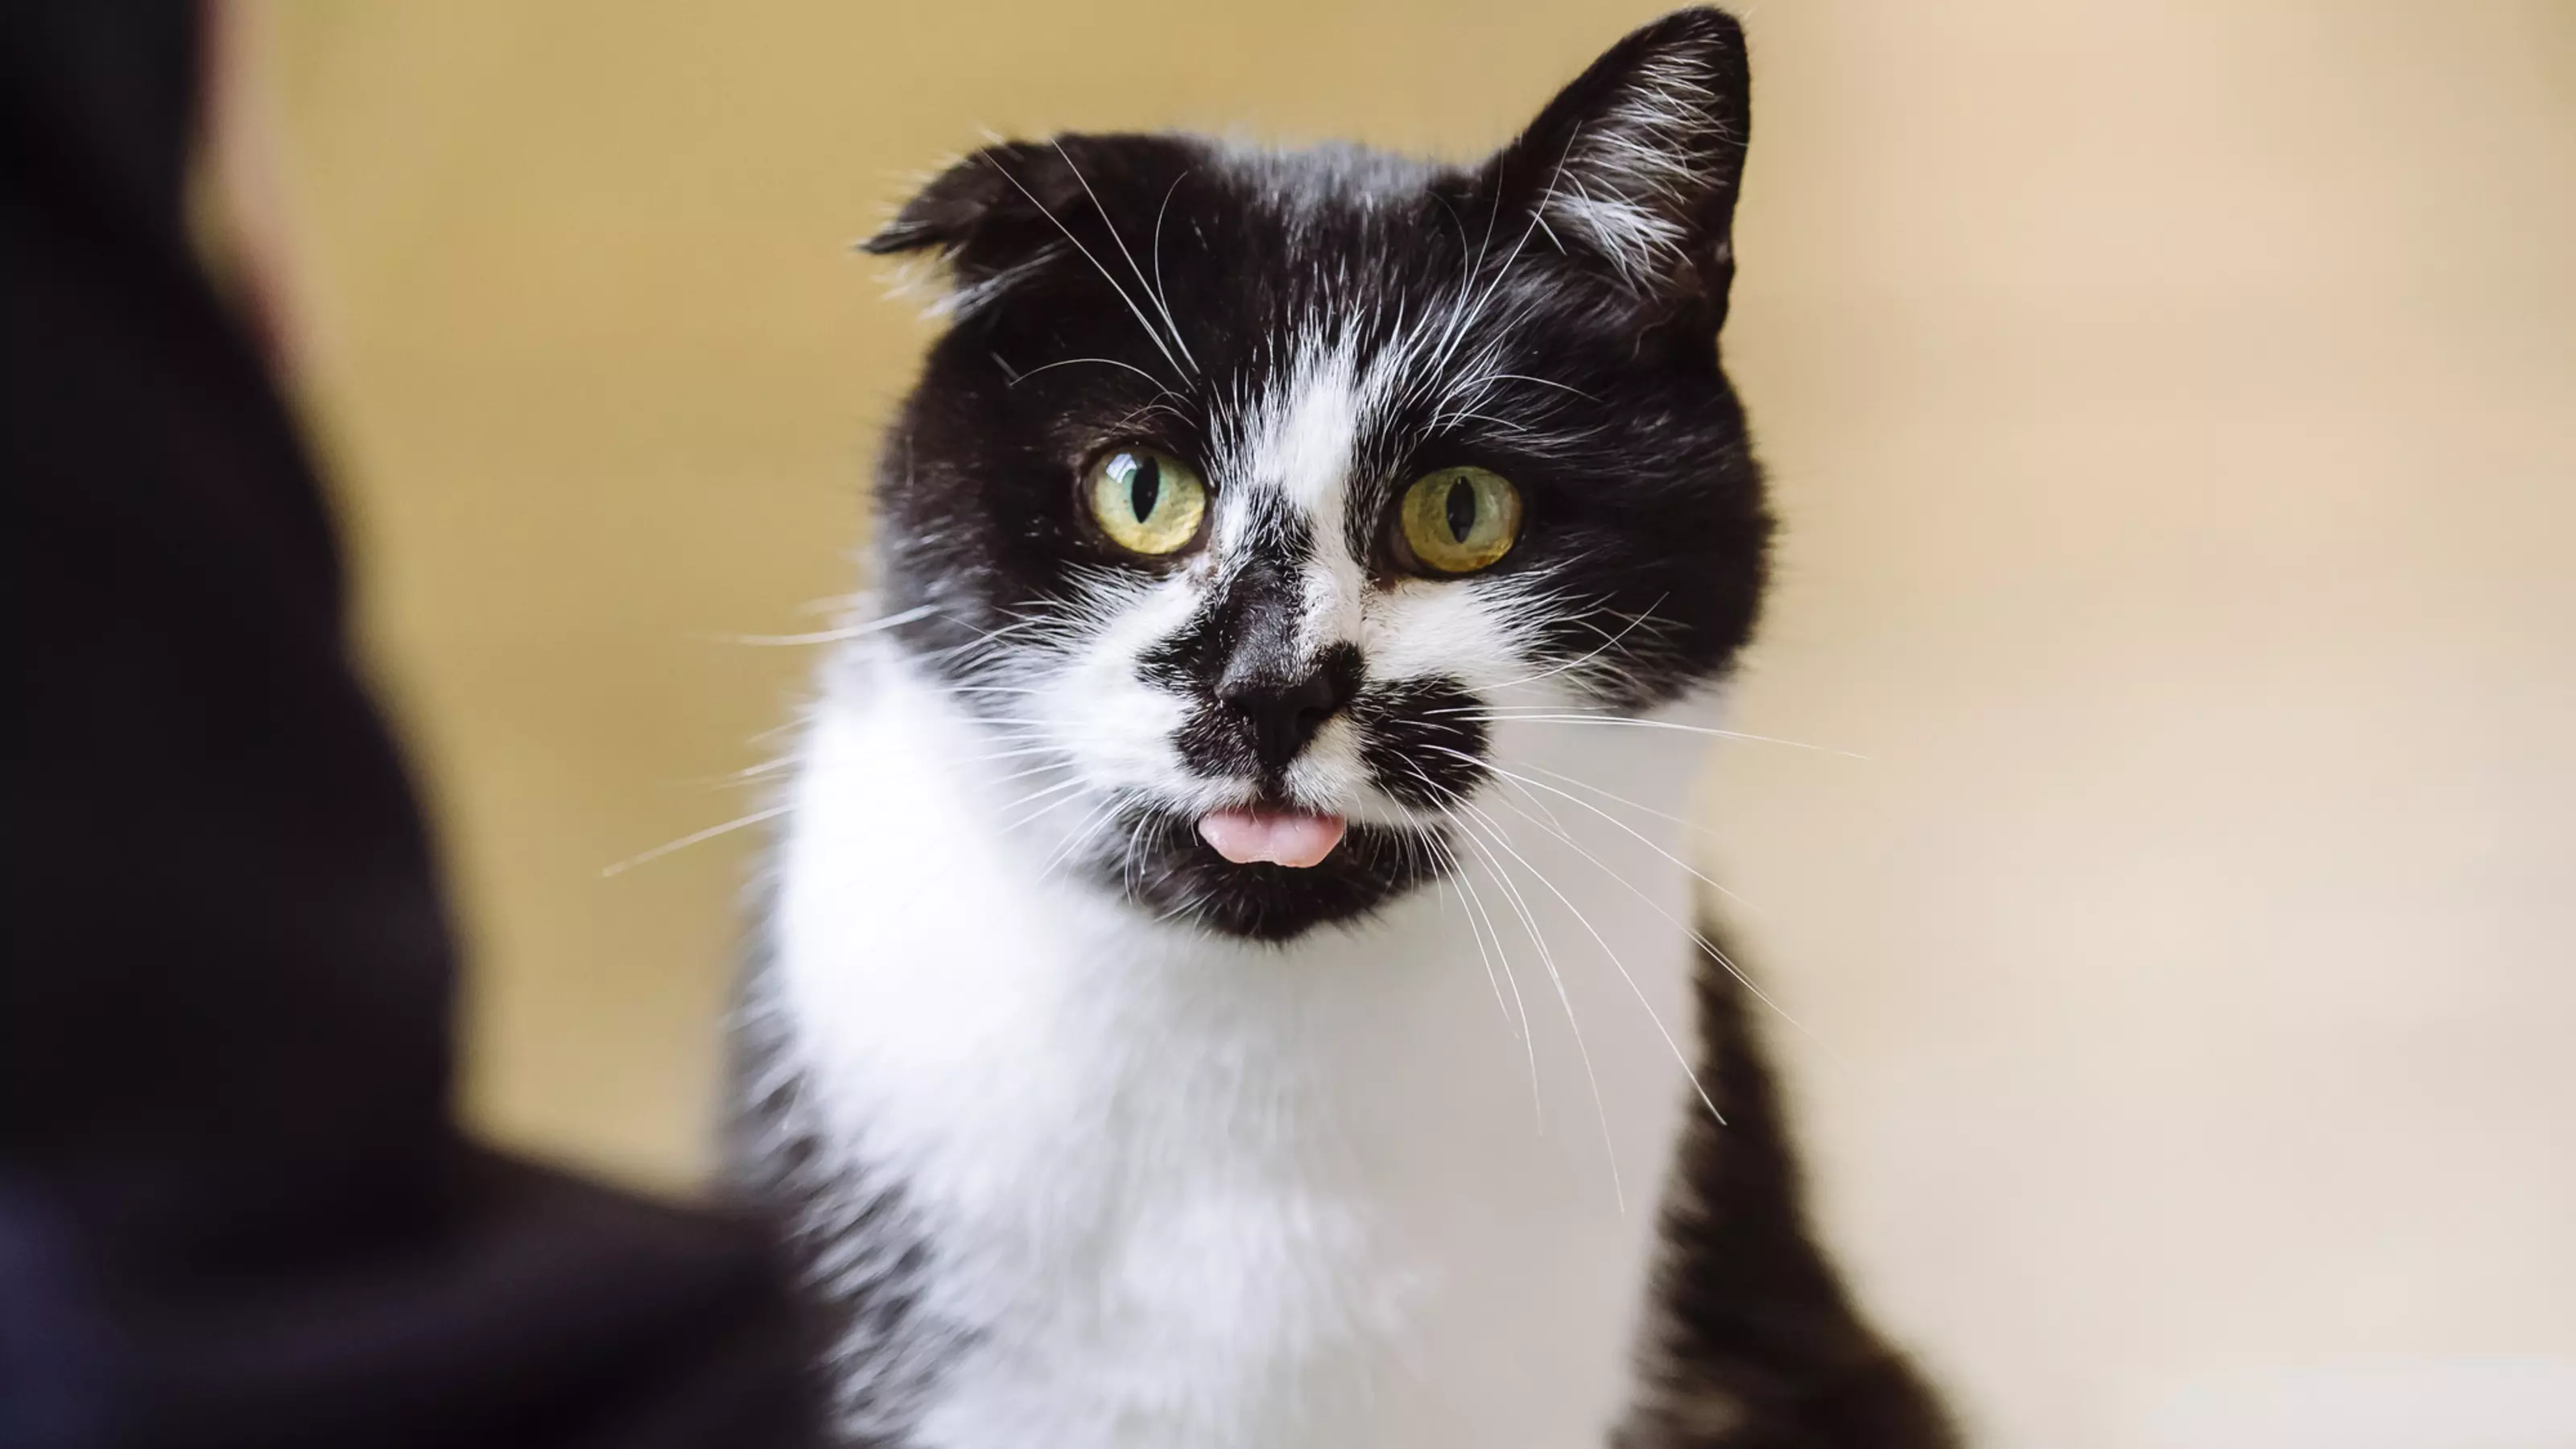 Black and white cat with one ear down and tongue sticking out